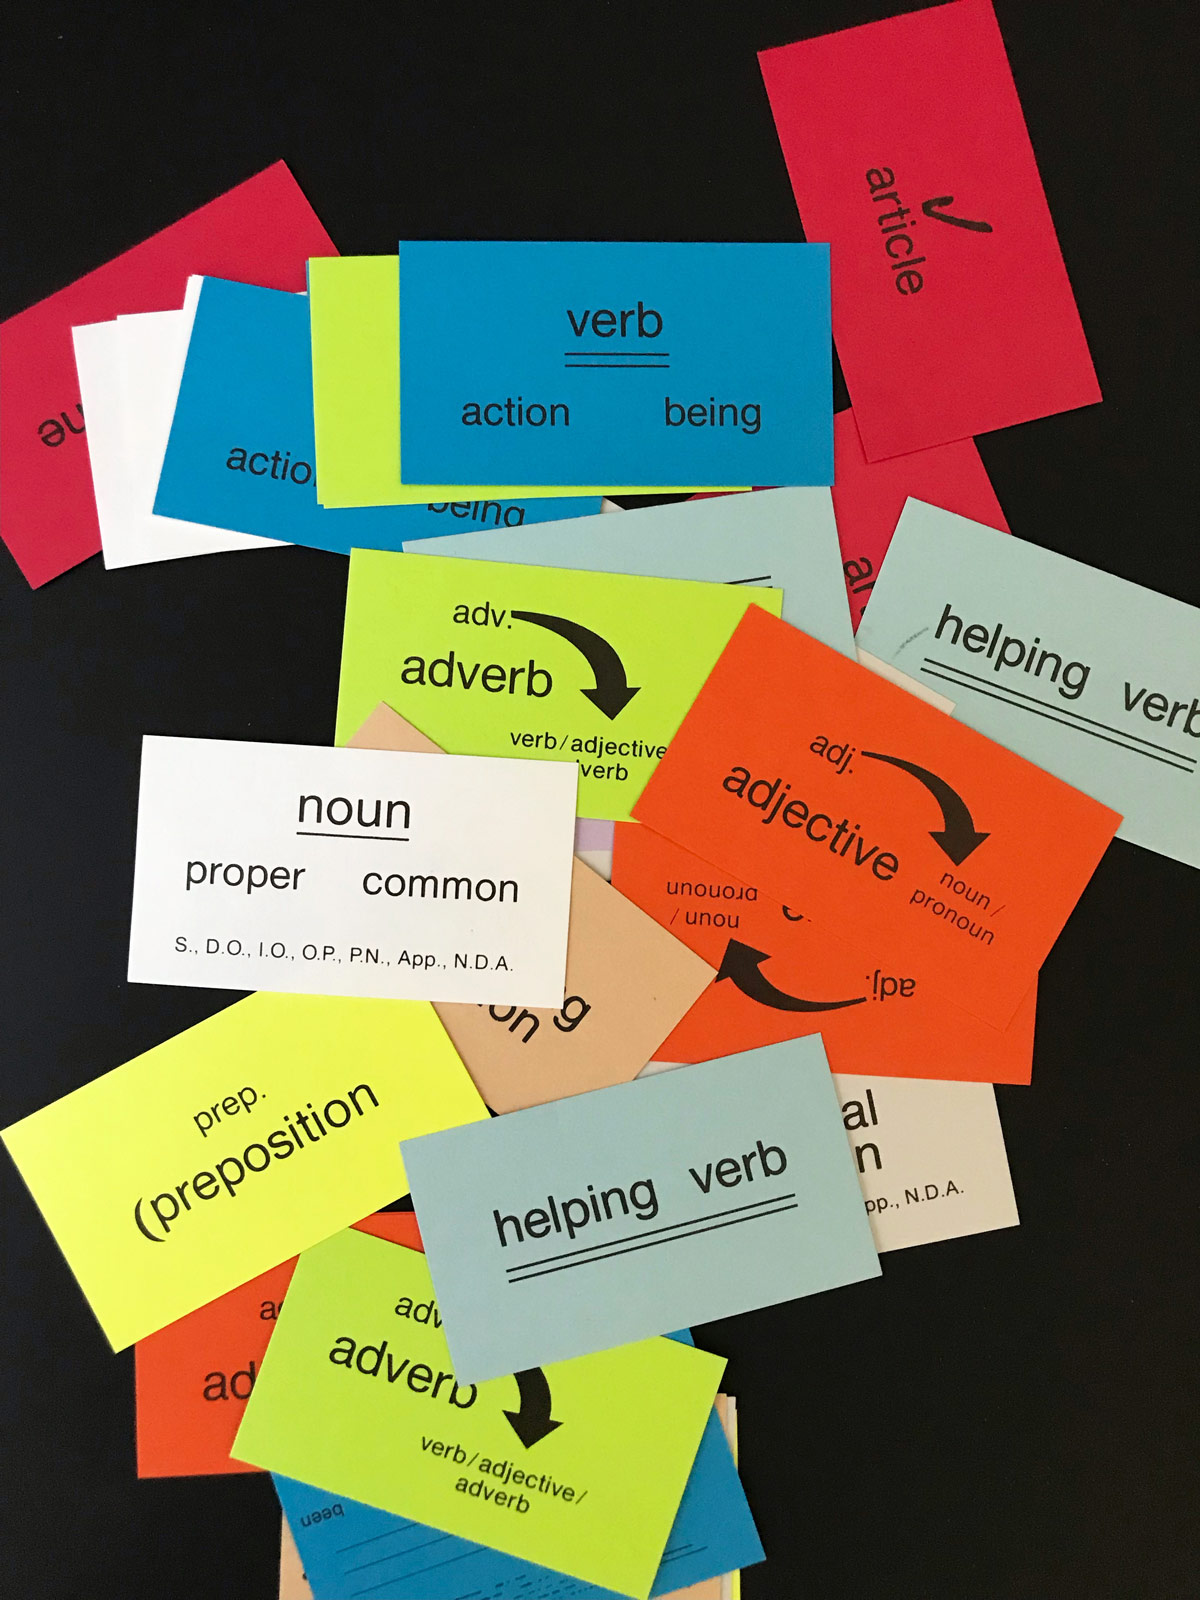 grammar flashcards spread out on black table.